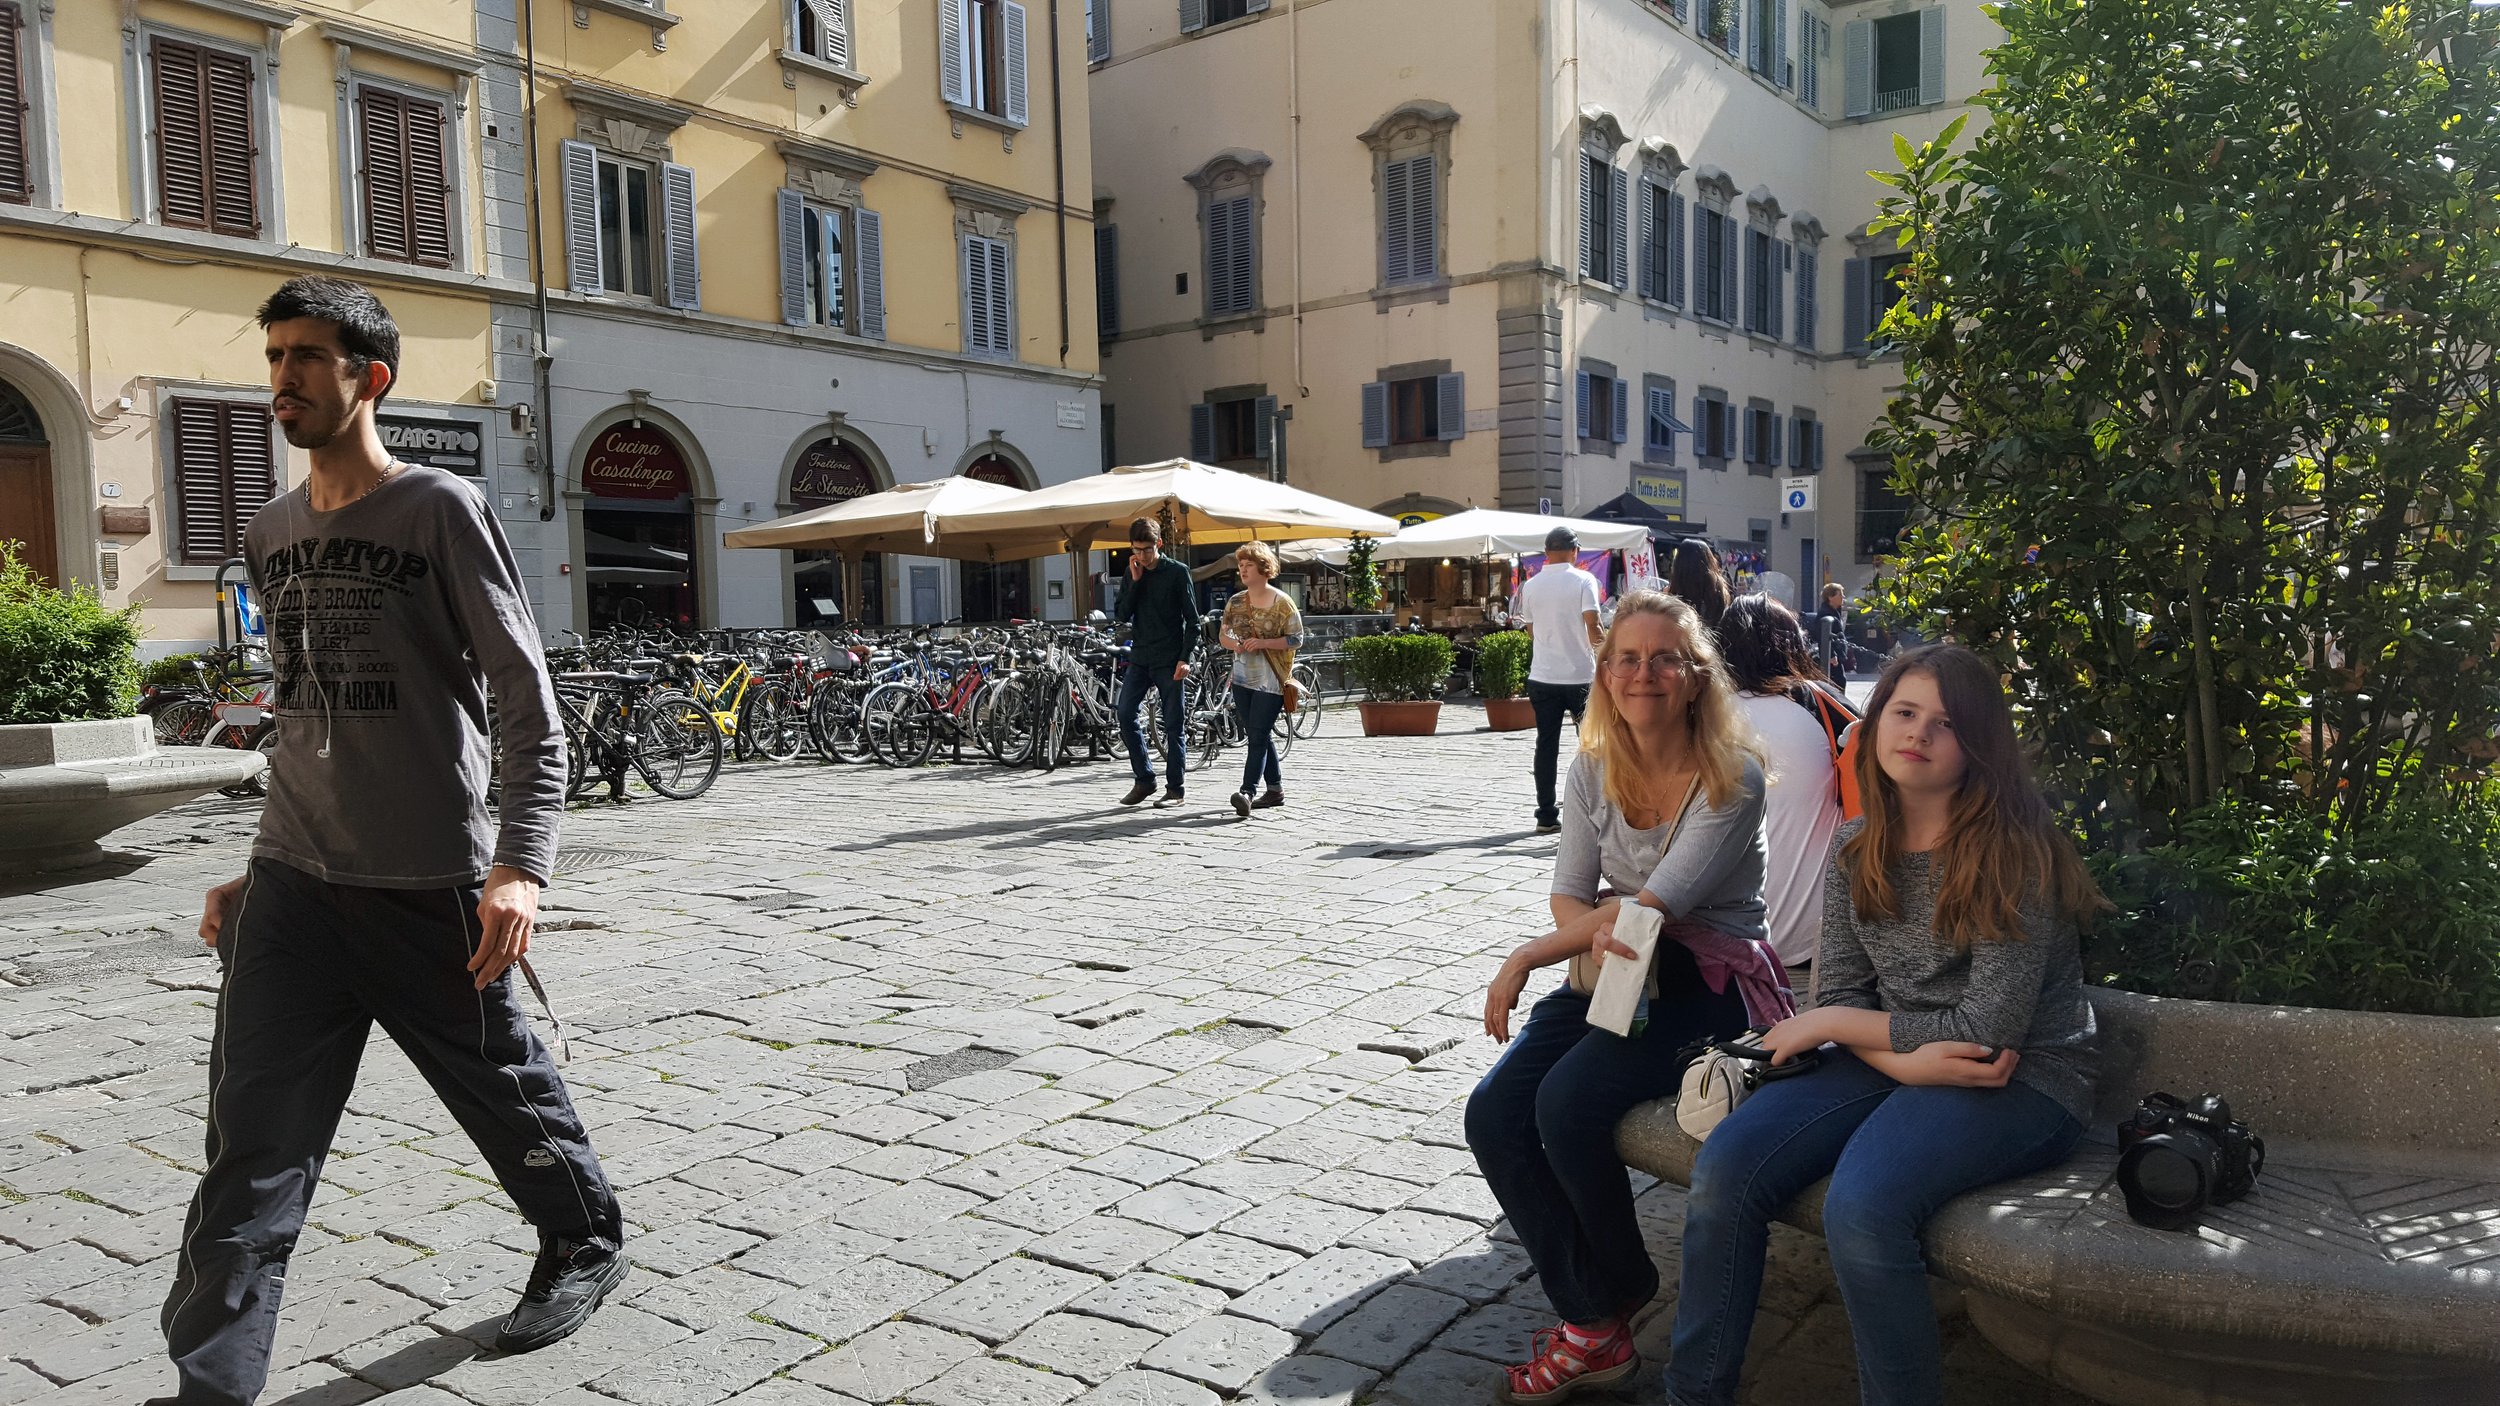 Street life on a piazza